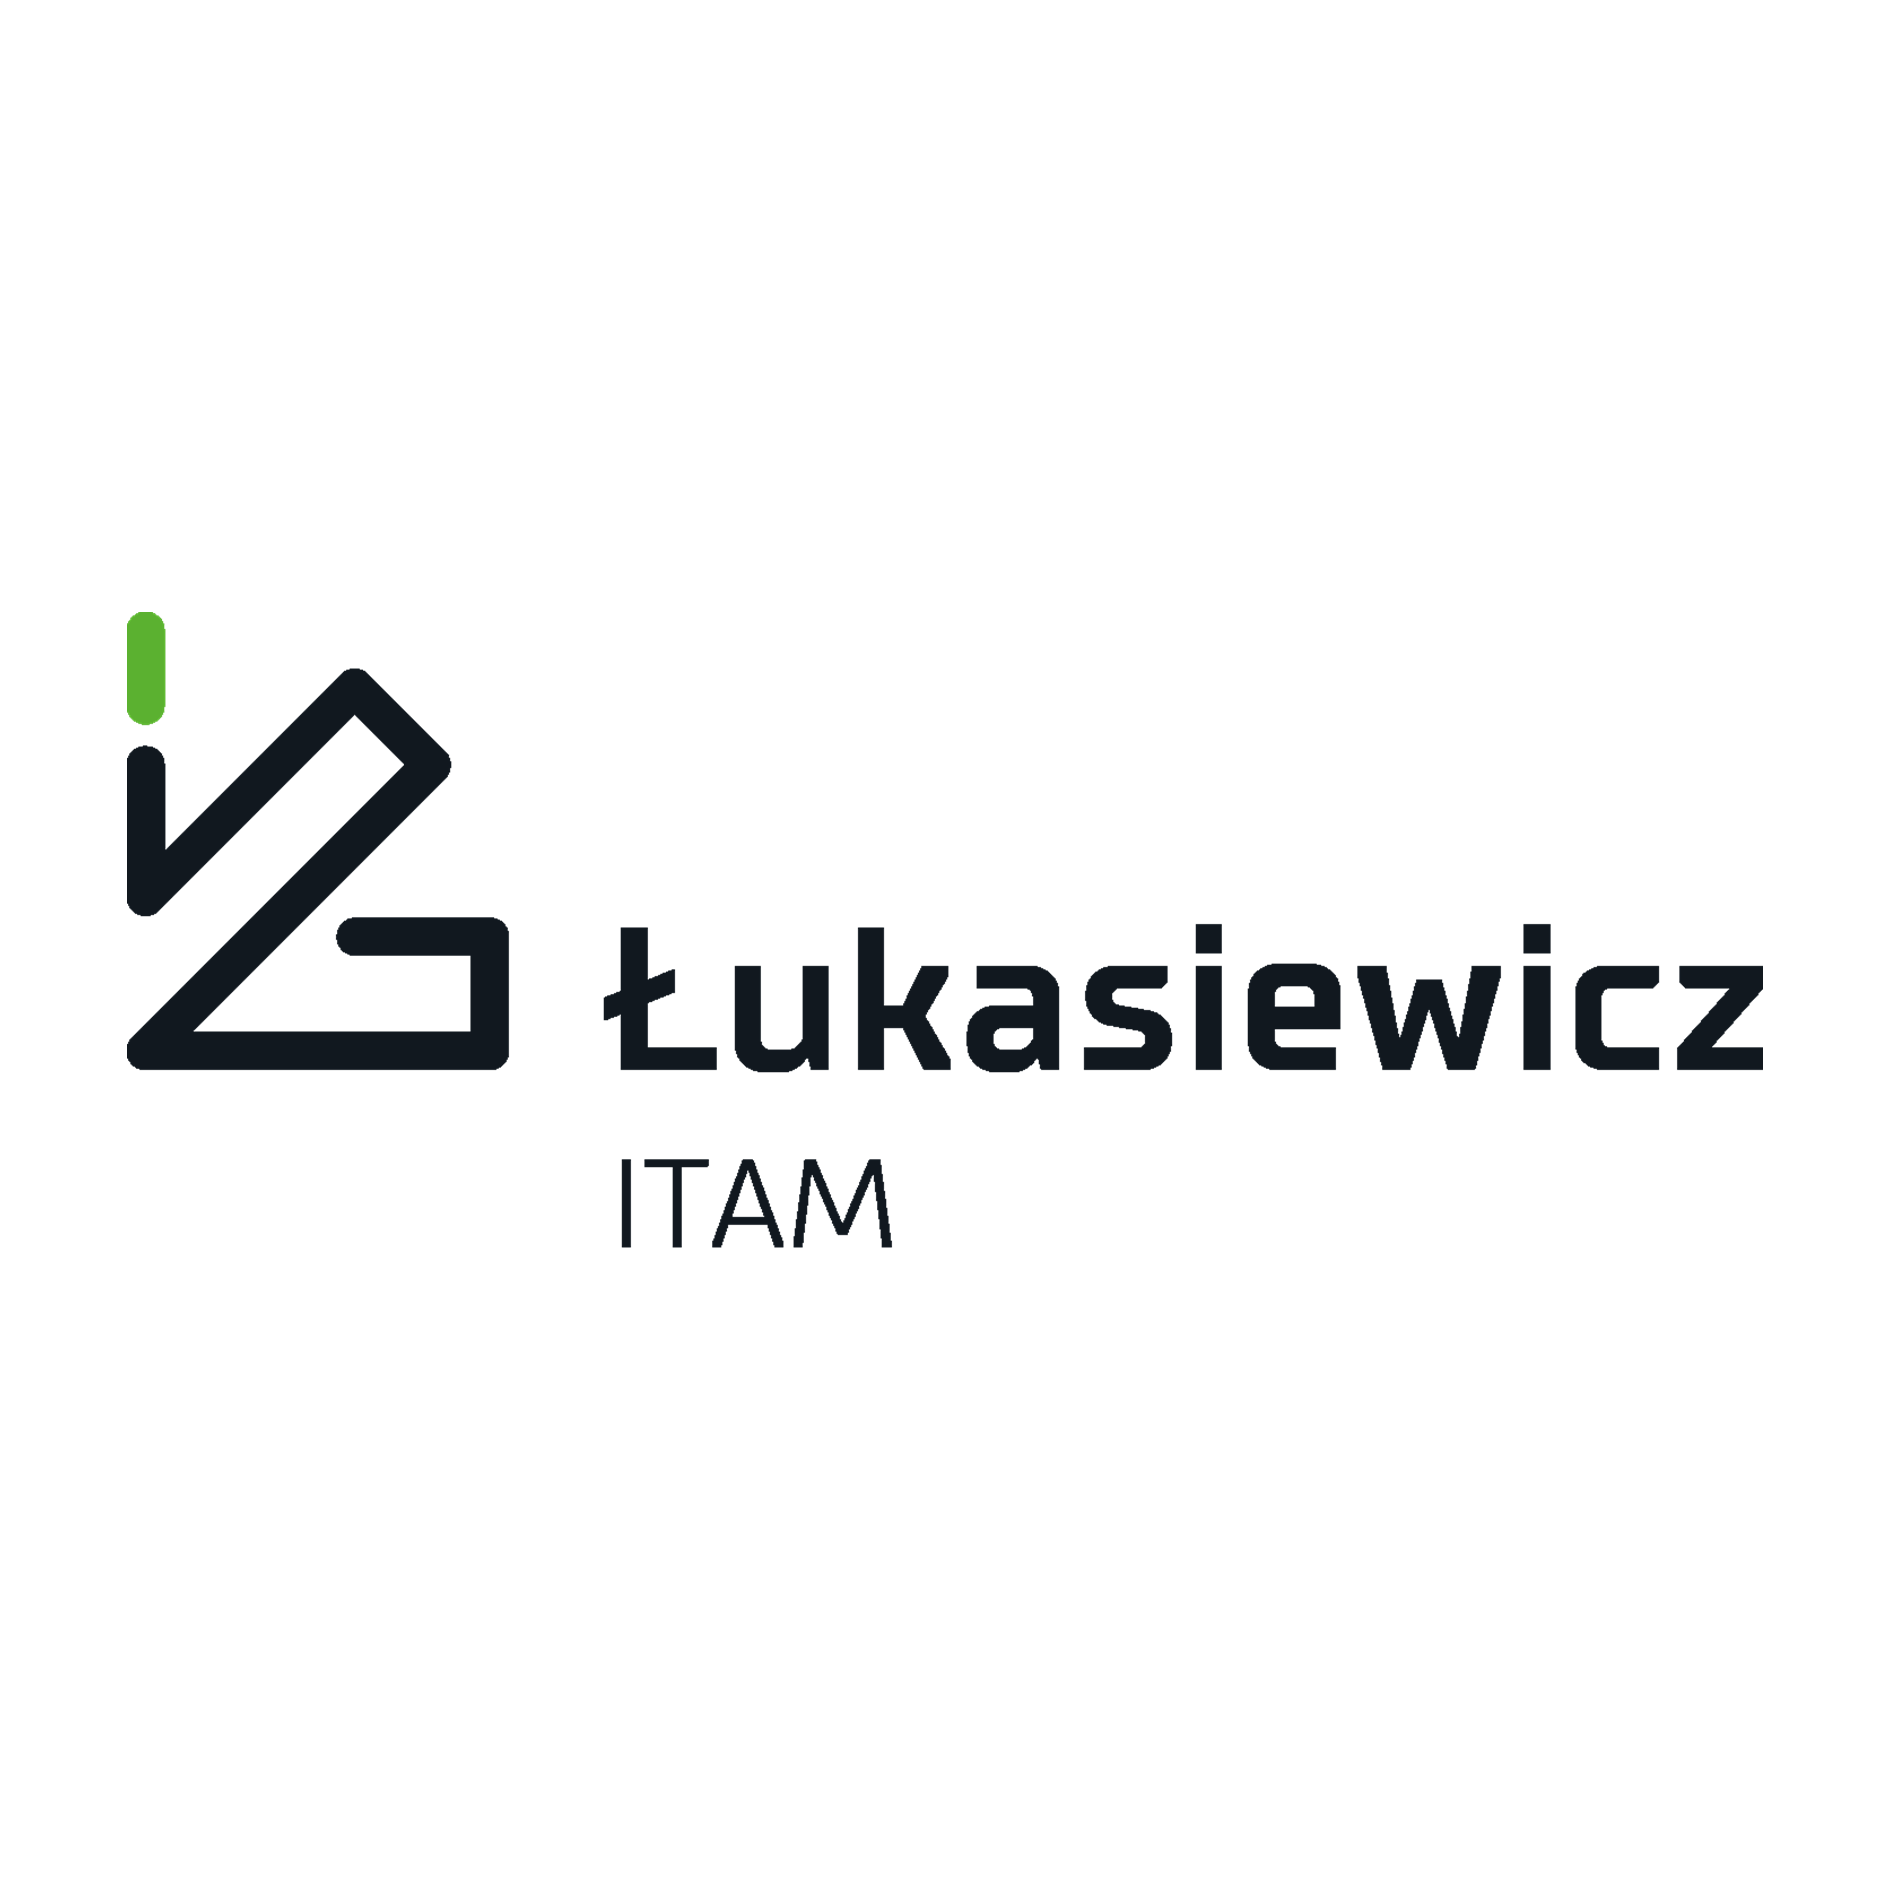 The Institute of Medical Technology and Medicine (ITAM) in Zabrze is a research institute whose statutory activities involve research